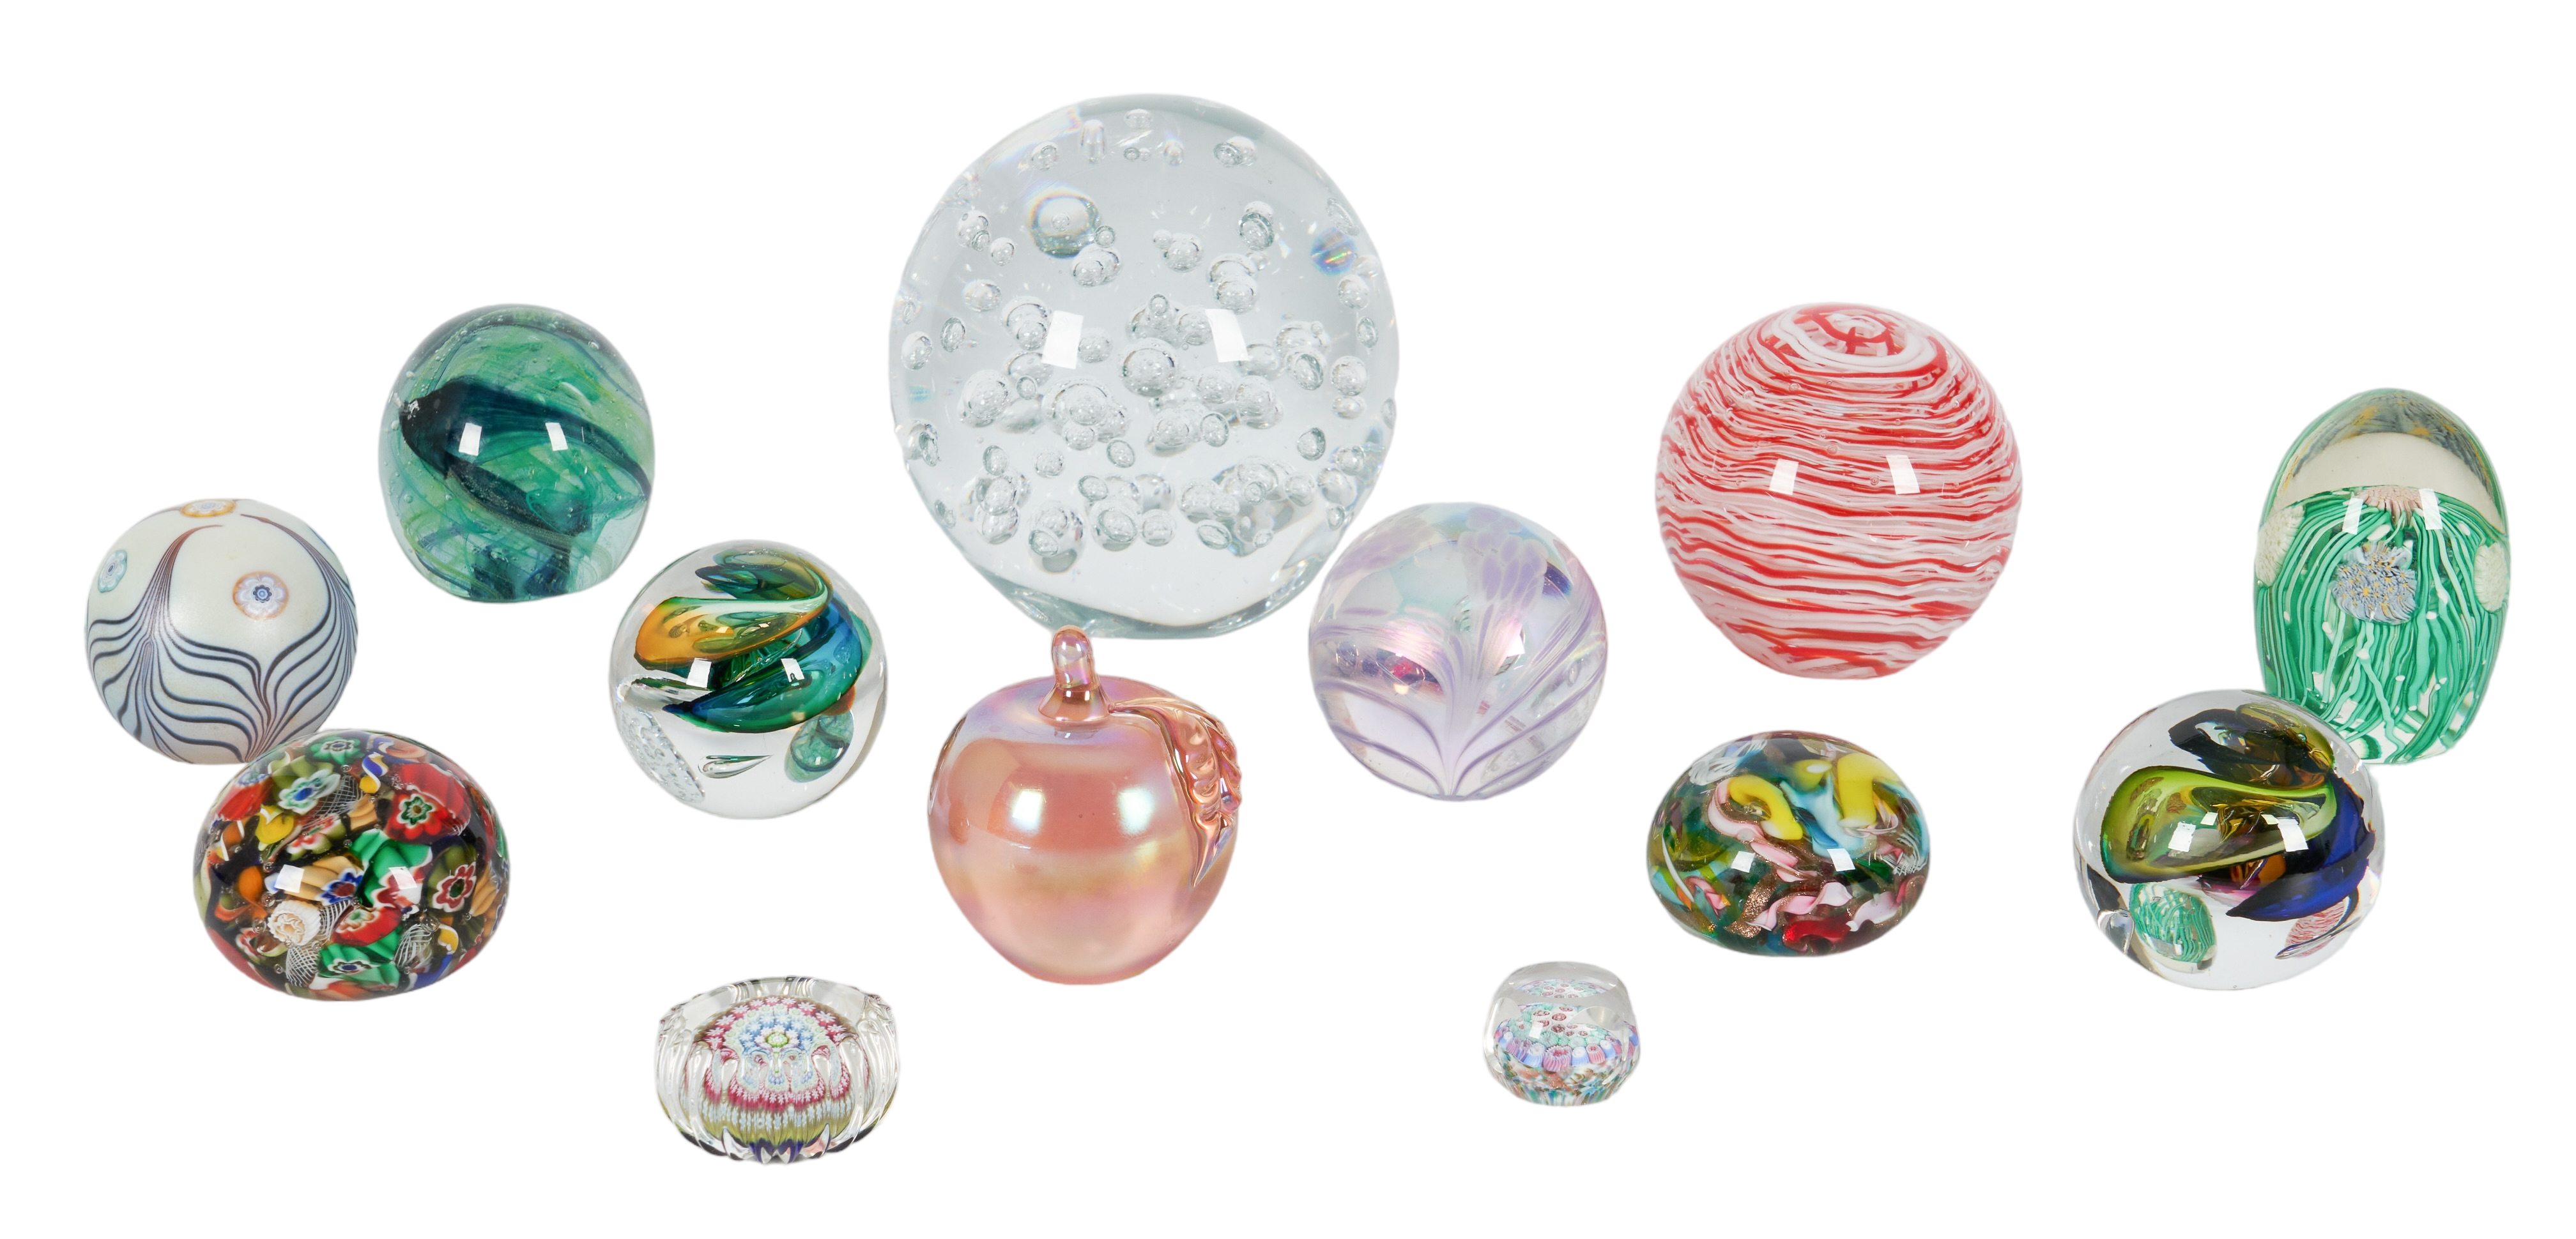  13 Art glass paperweights to 2e2397